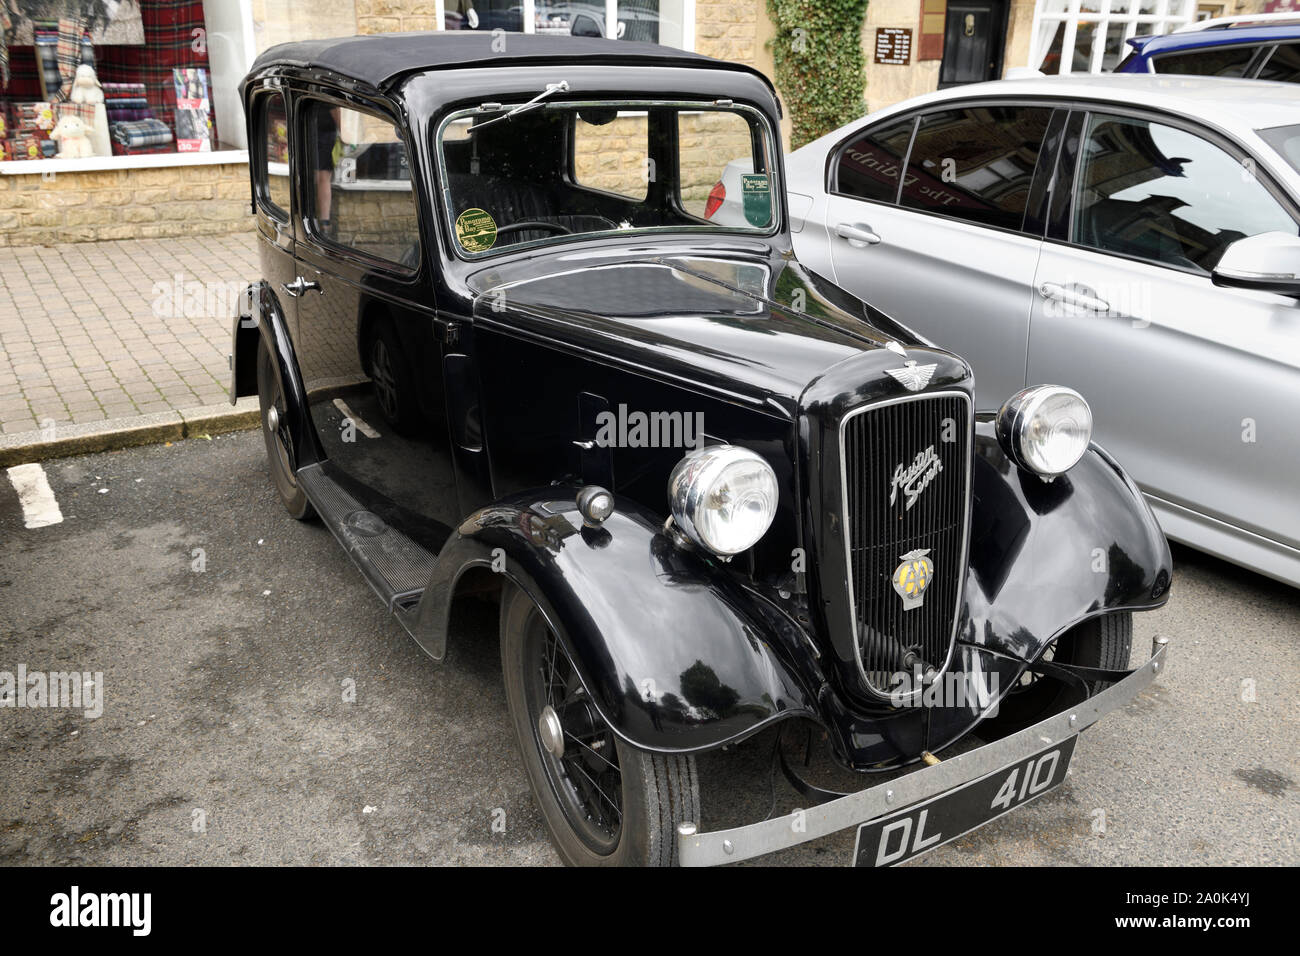 Black 1937 Austin Seven Ascot classic car parked on High street Bourton-on-the-Water Cotswold District England Stock Photo